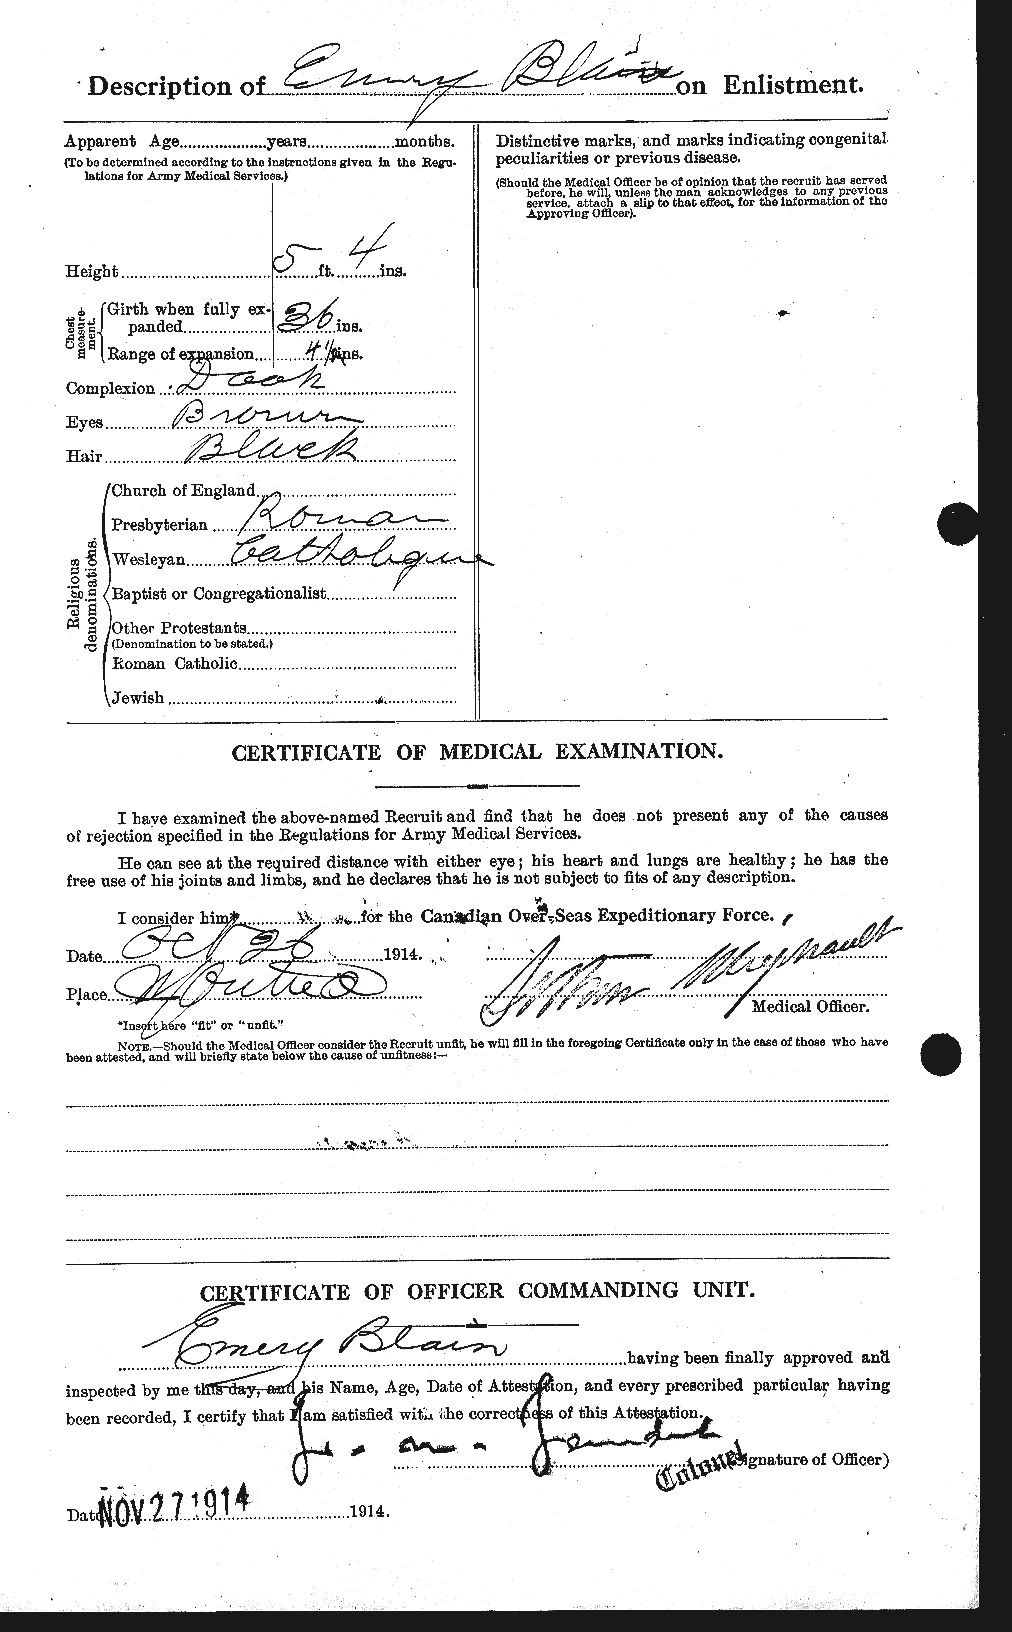 Personnel Records of the First World War - CEF 246001b